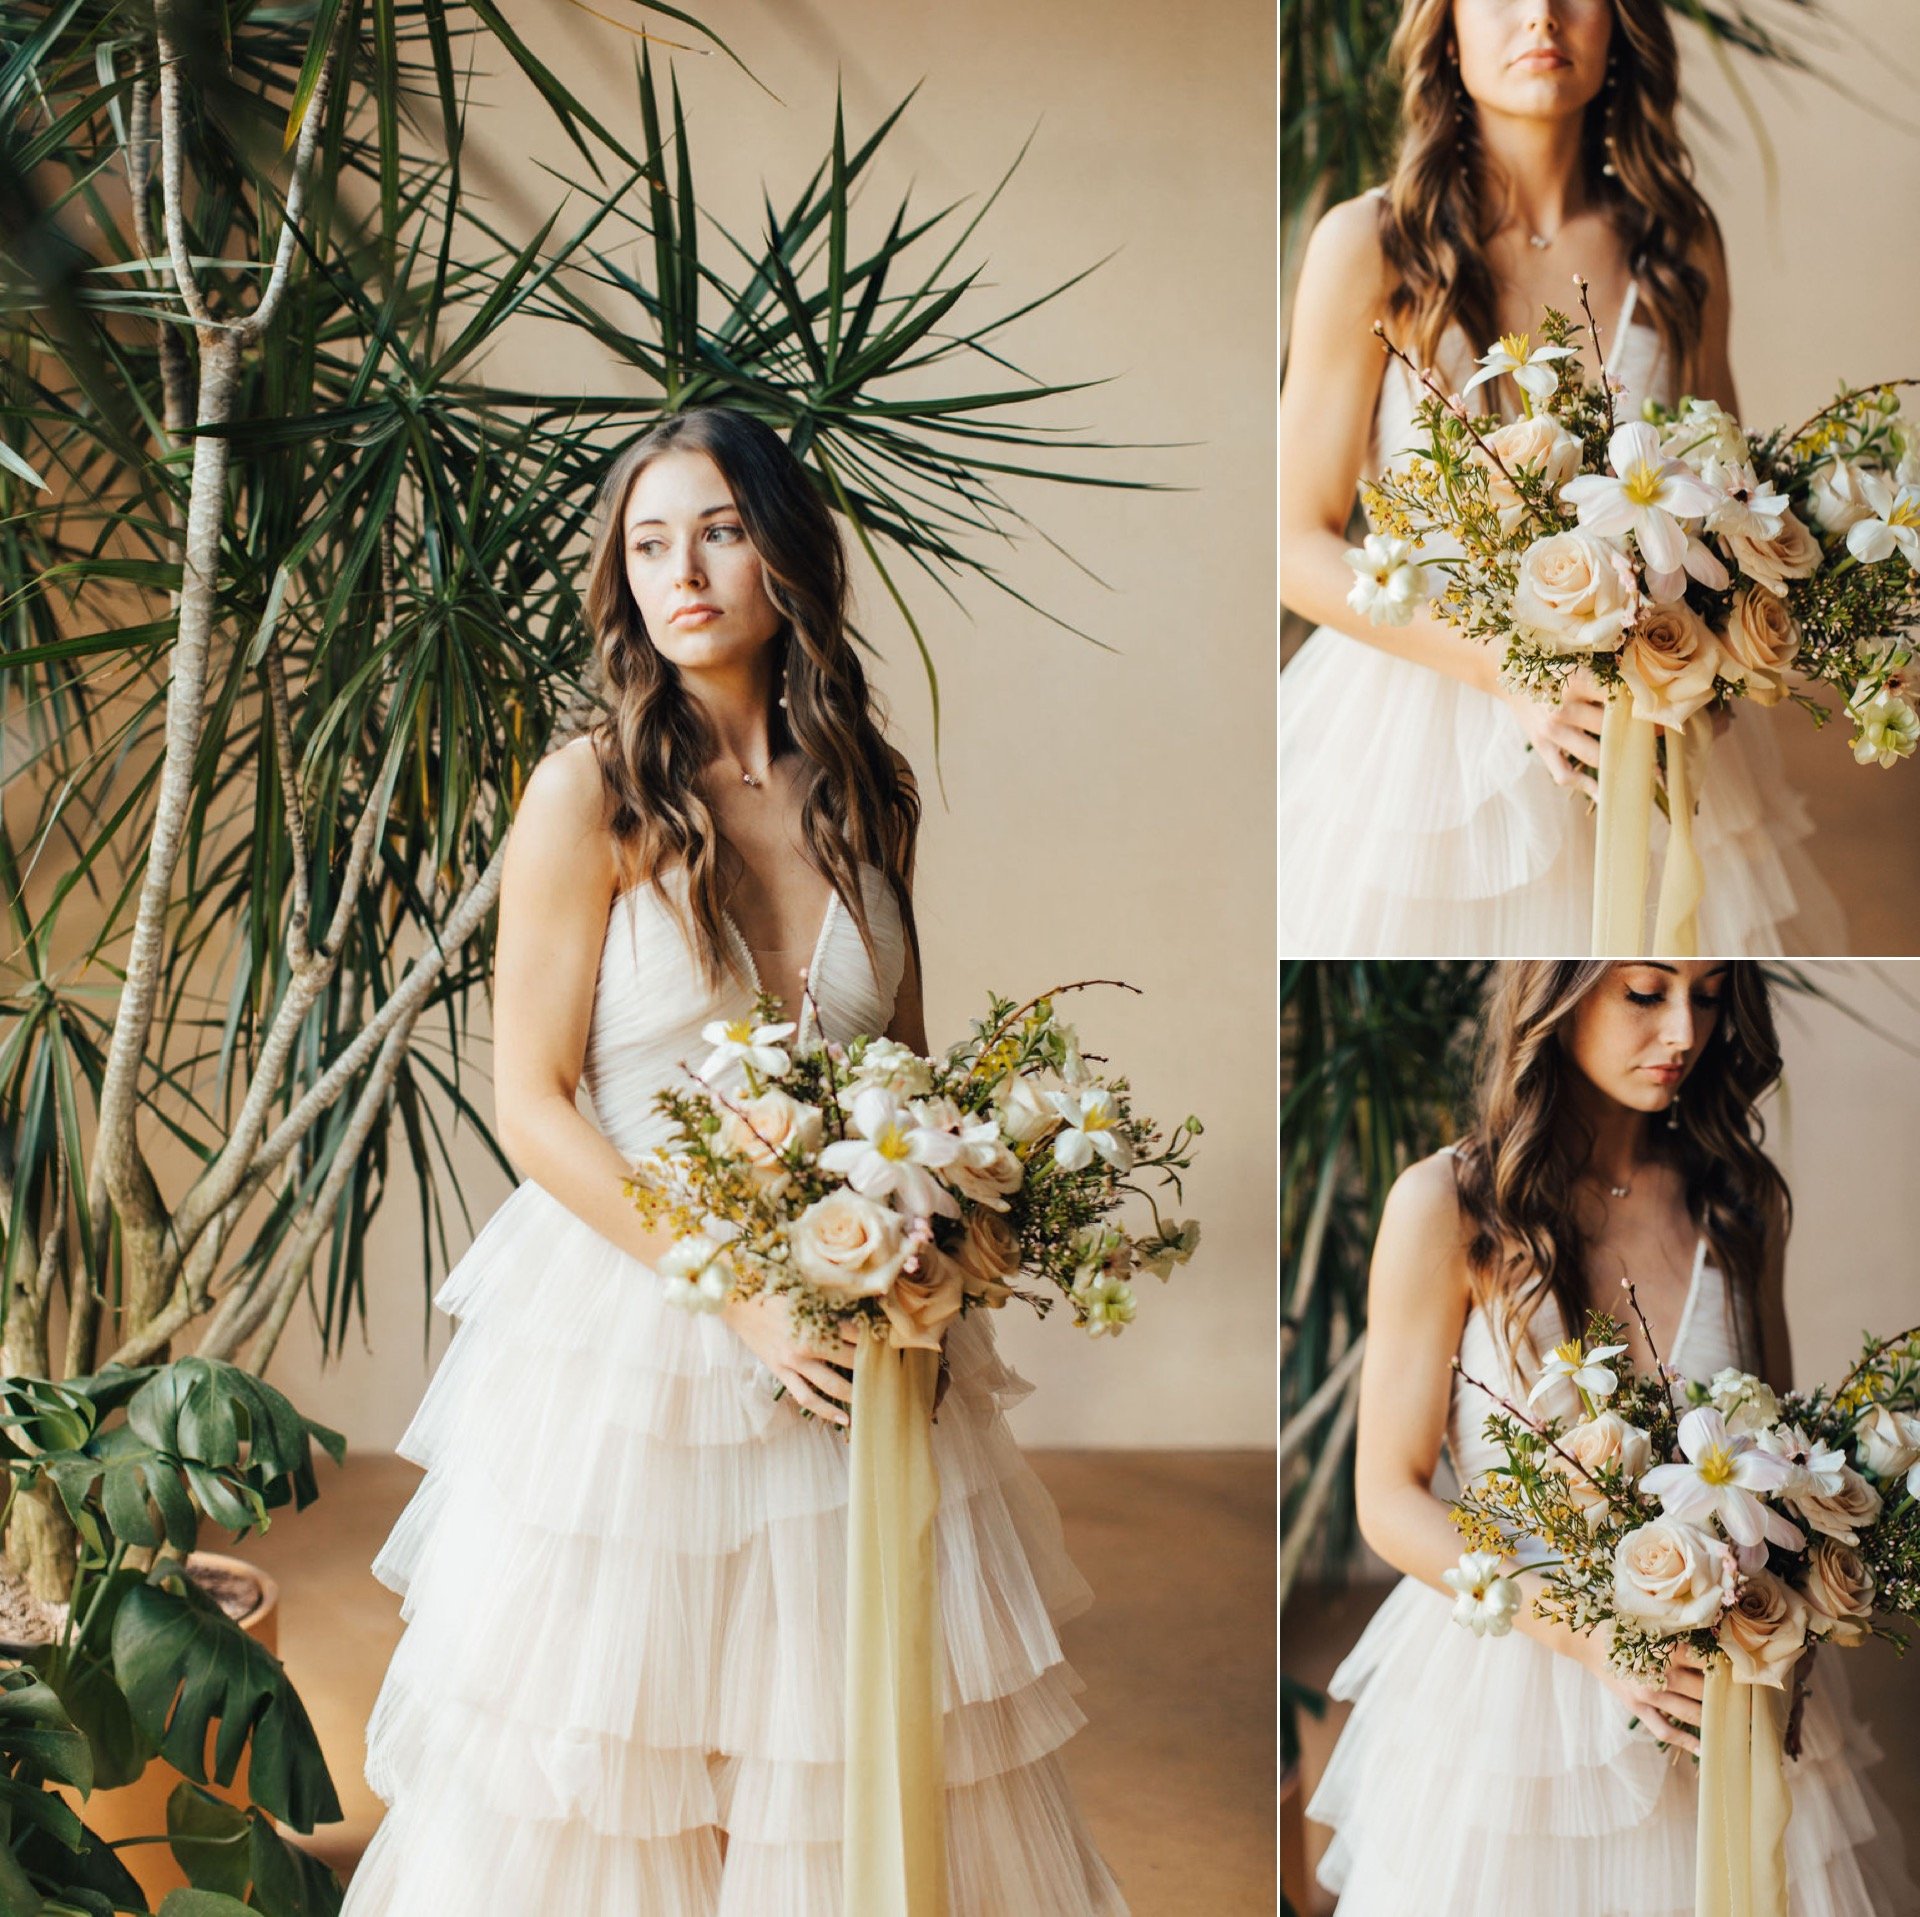 Each Other Space, Minne Floral Co., Flutter Bridal Co.